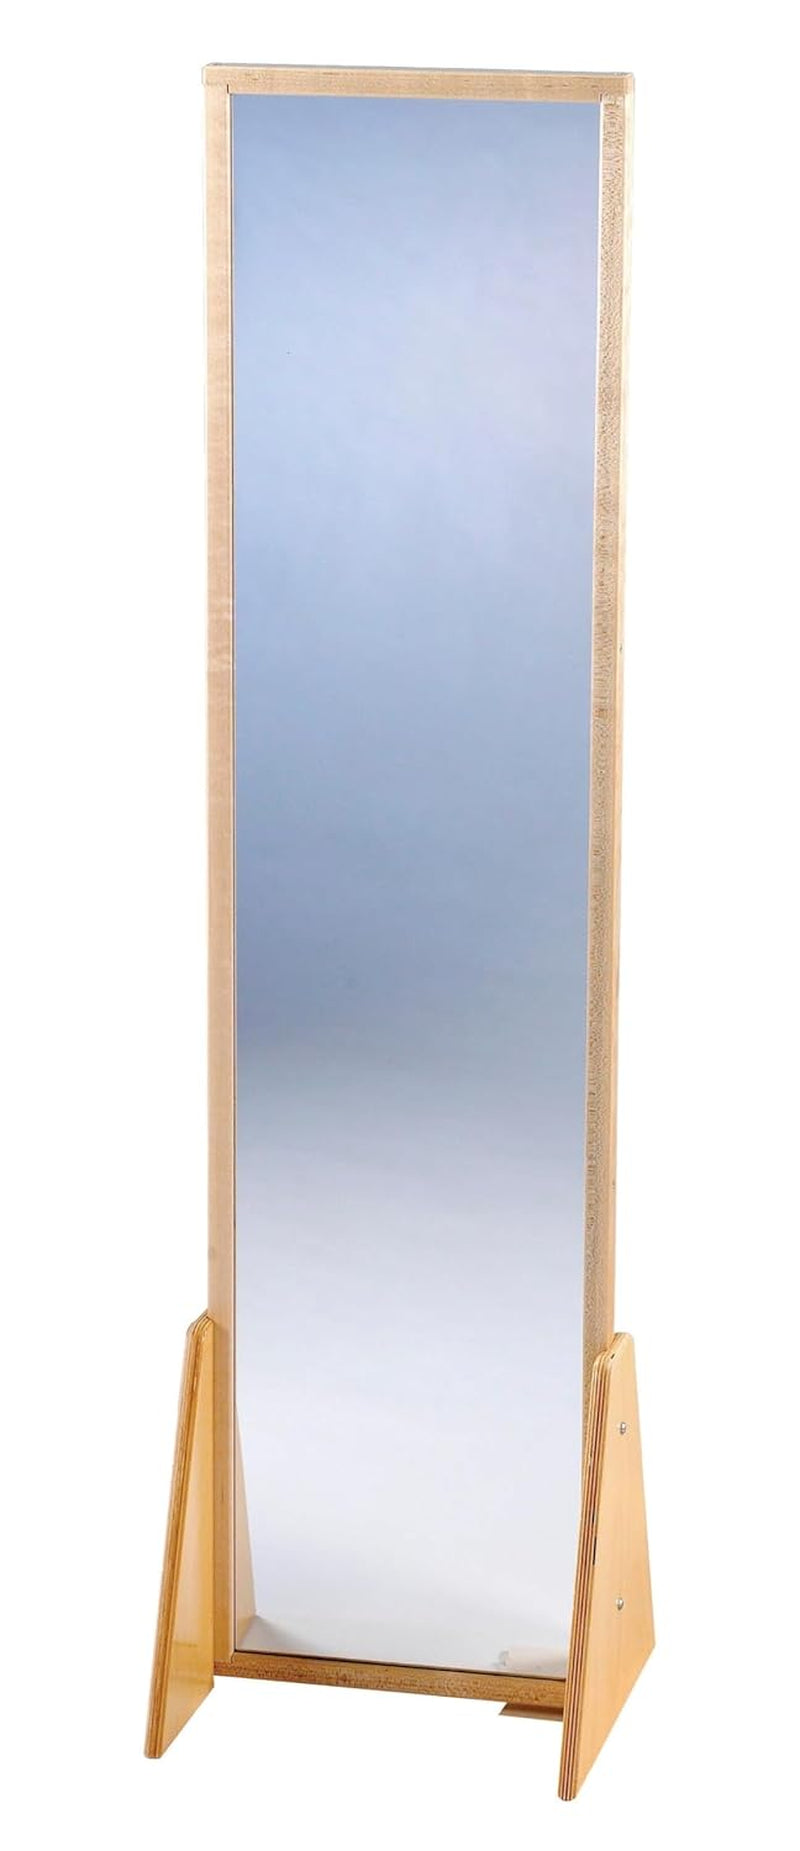 2 Position Acrylic Mirror, Large, 13-1/4 X 11-3/4 X 48-1/2 Inches - 271504